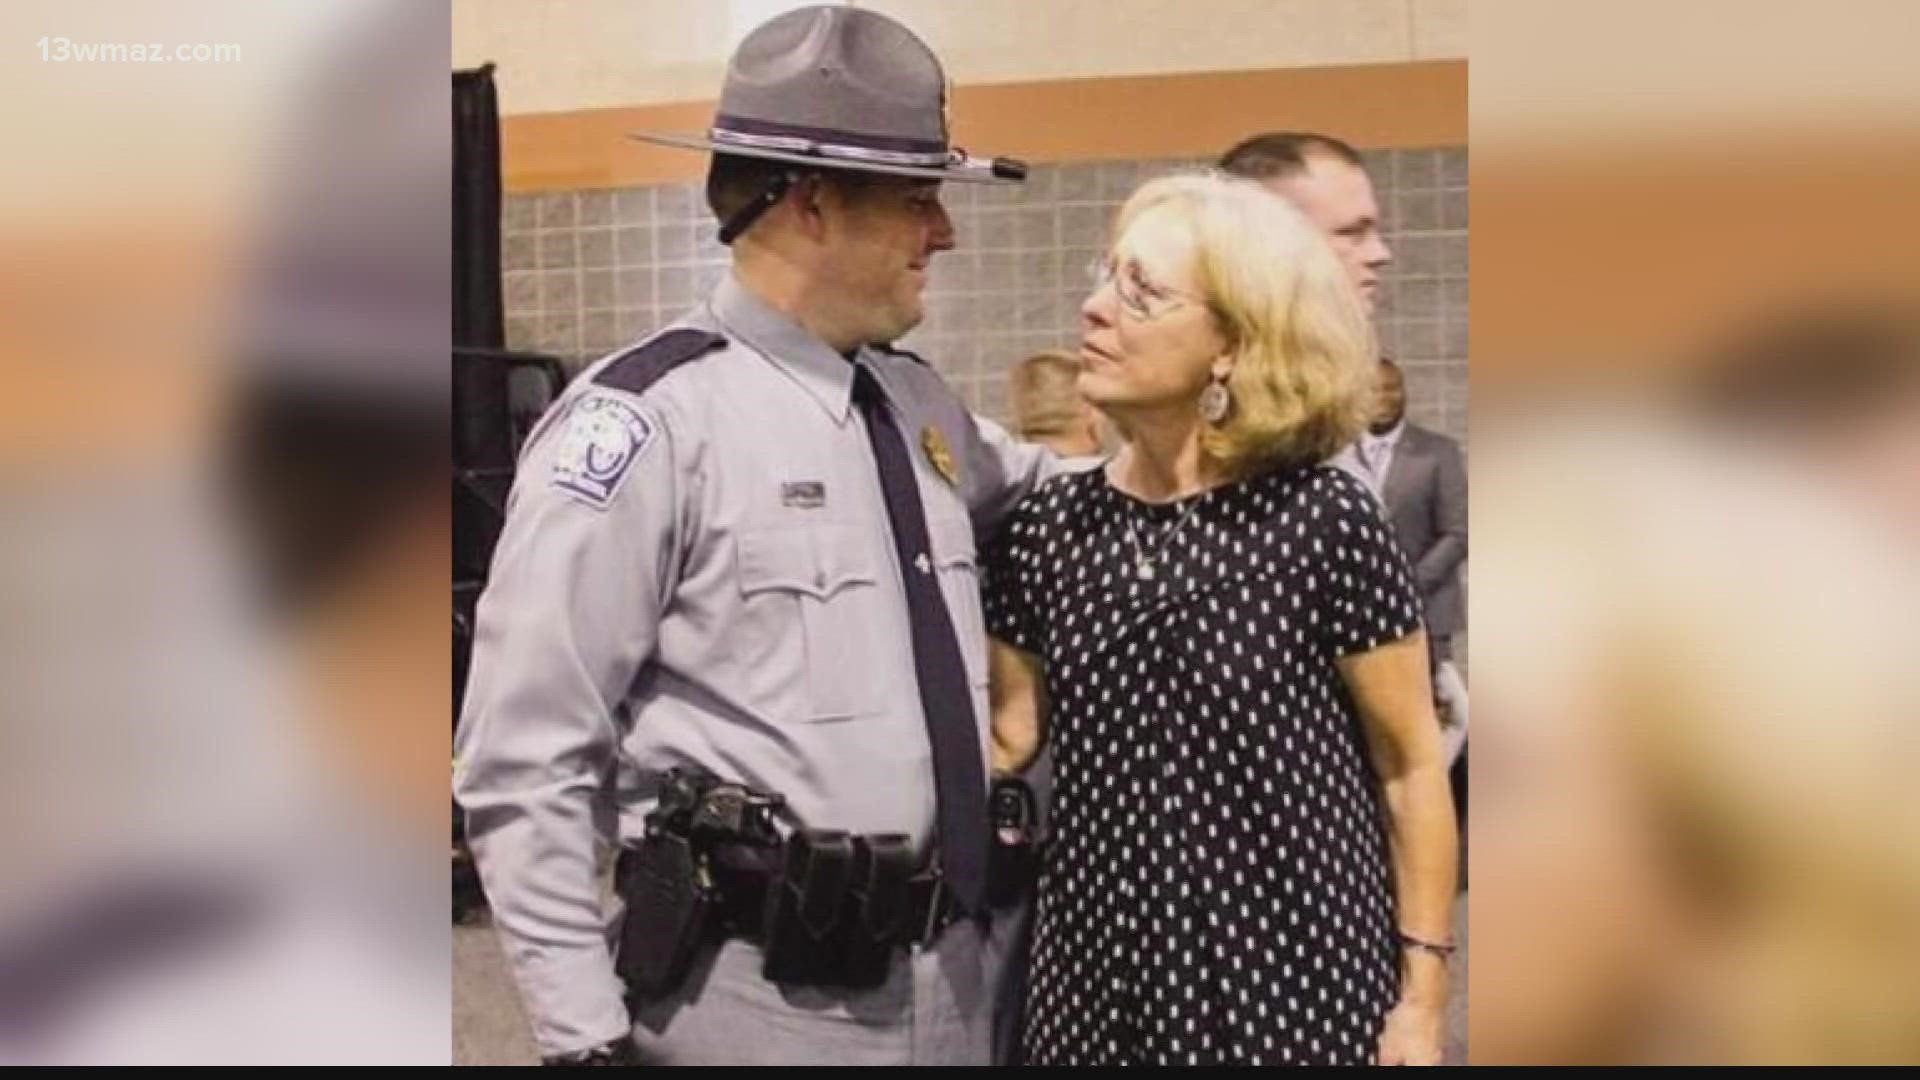 Tess and her husband lost their son Keith, a S.C. state trooper, in 2017. Her heart has connected with those wearing the badge